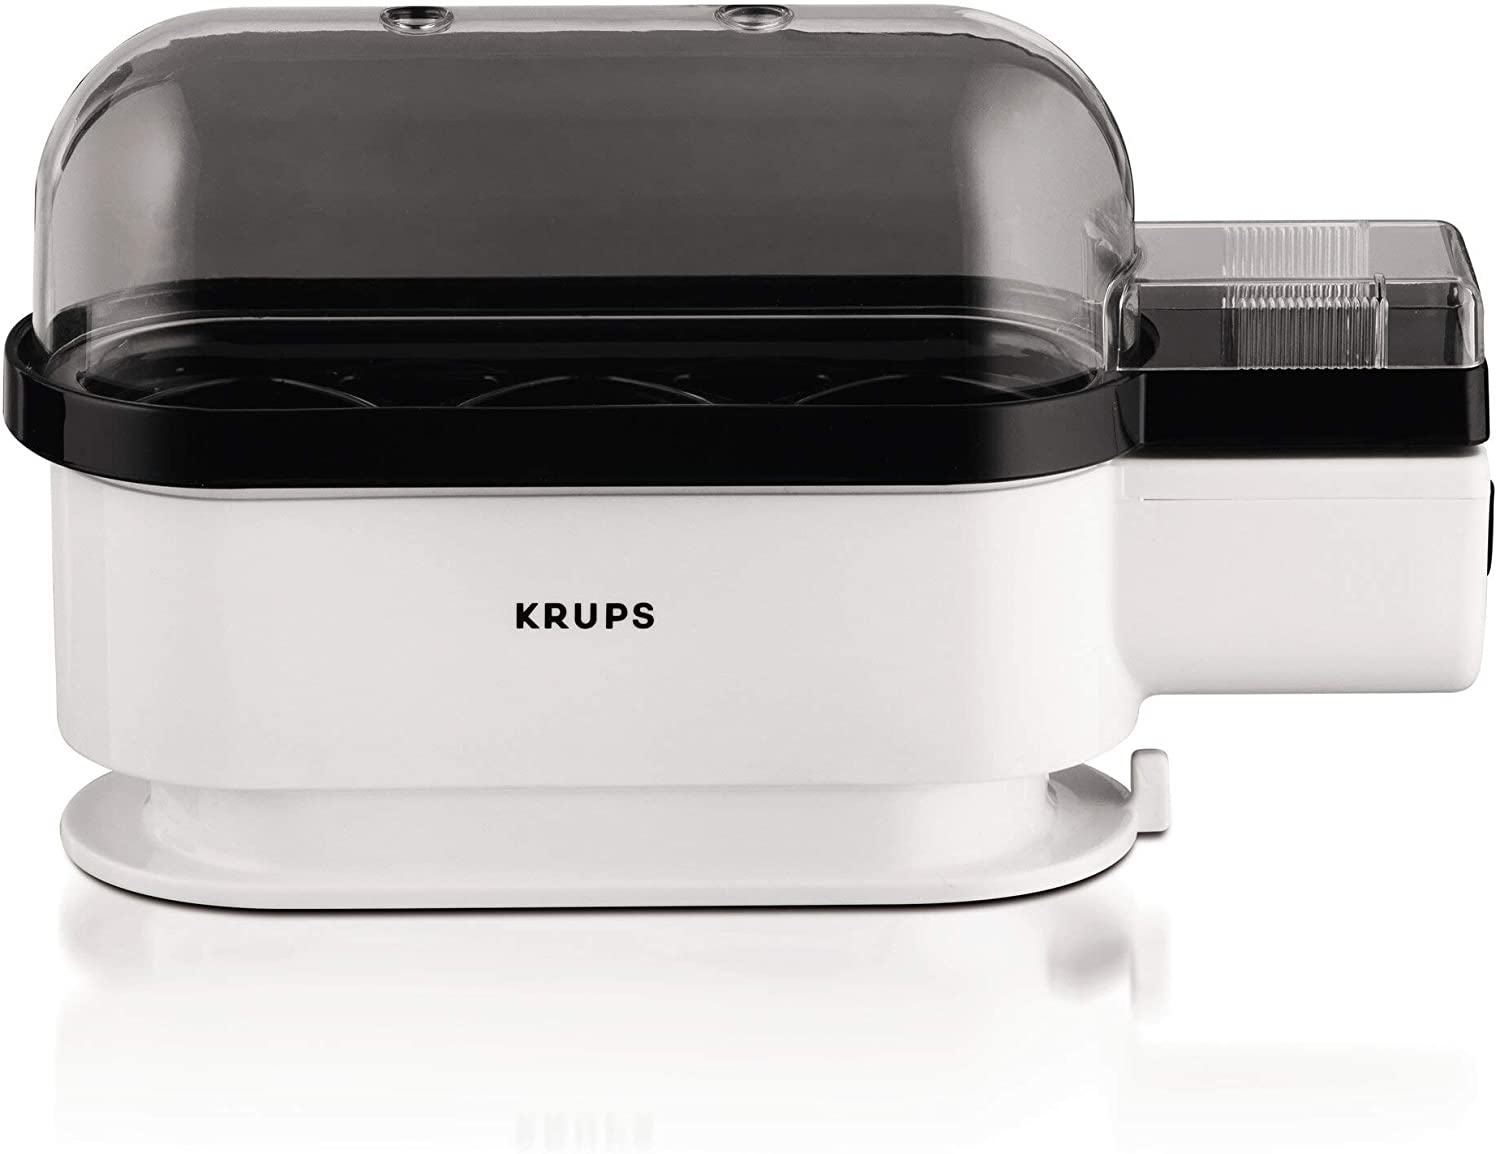 Krups F 234 70 - egg cookers